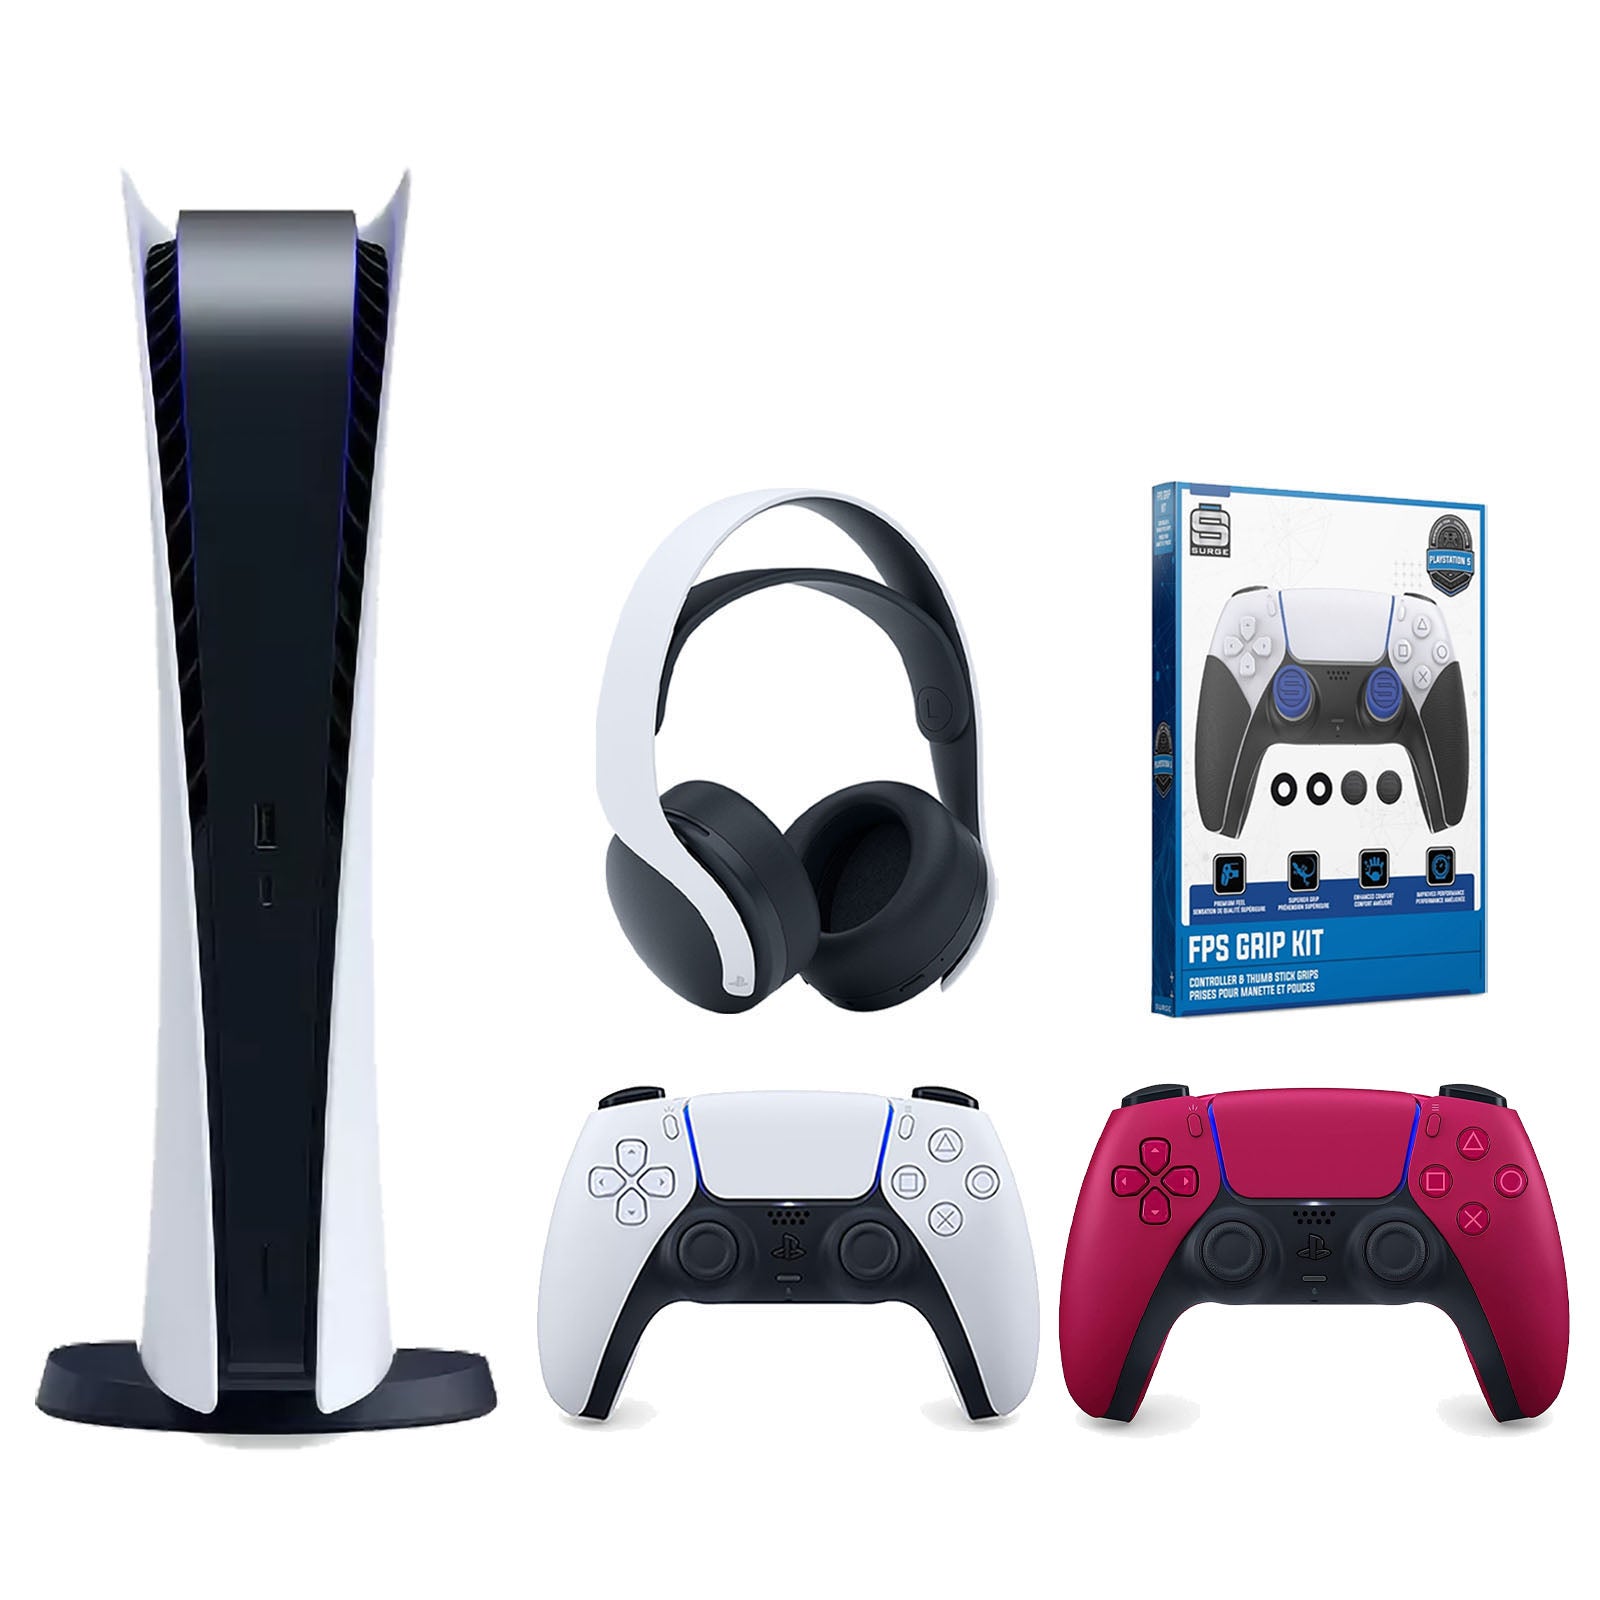 Sony Playstation 5 Digital Edition Console with Extra Red Controller, White PULSE 3D Headset and Surge FPS Grip Kit With Precision Aiming Rings Bundle - Pro-Distributing